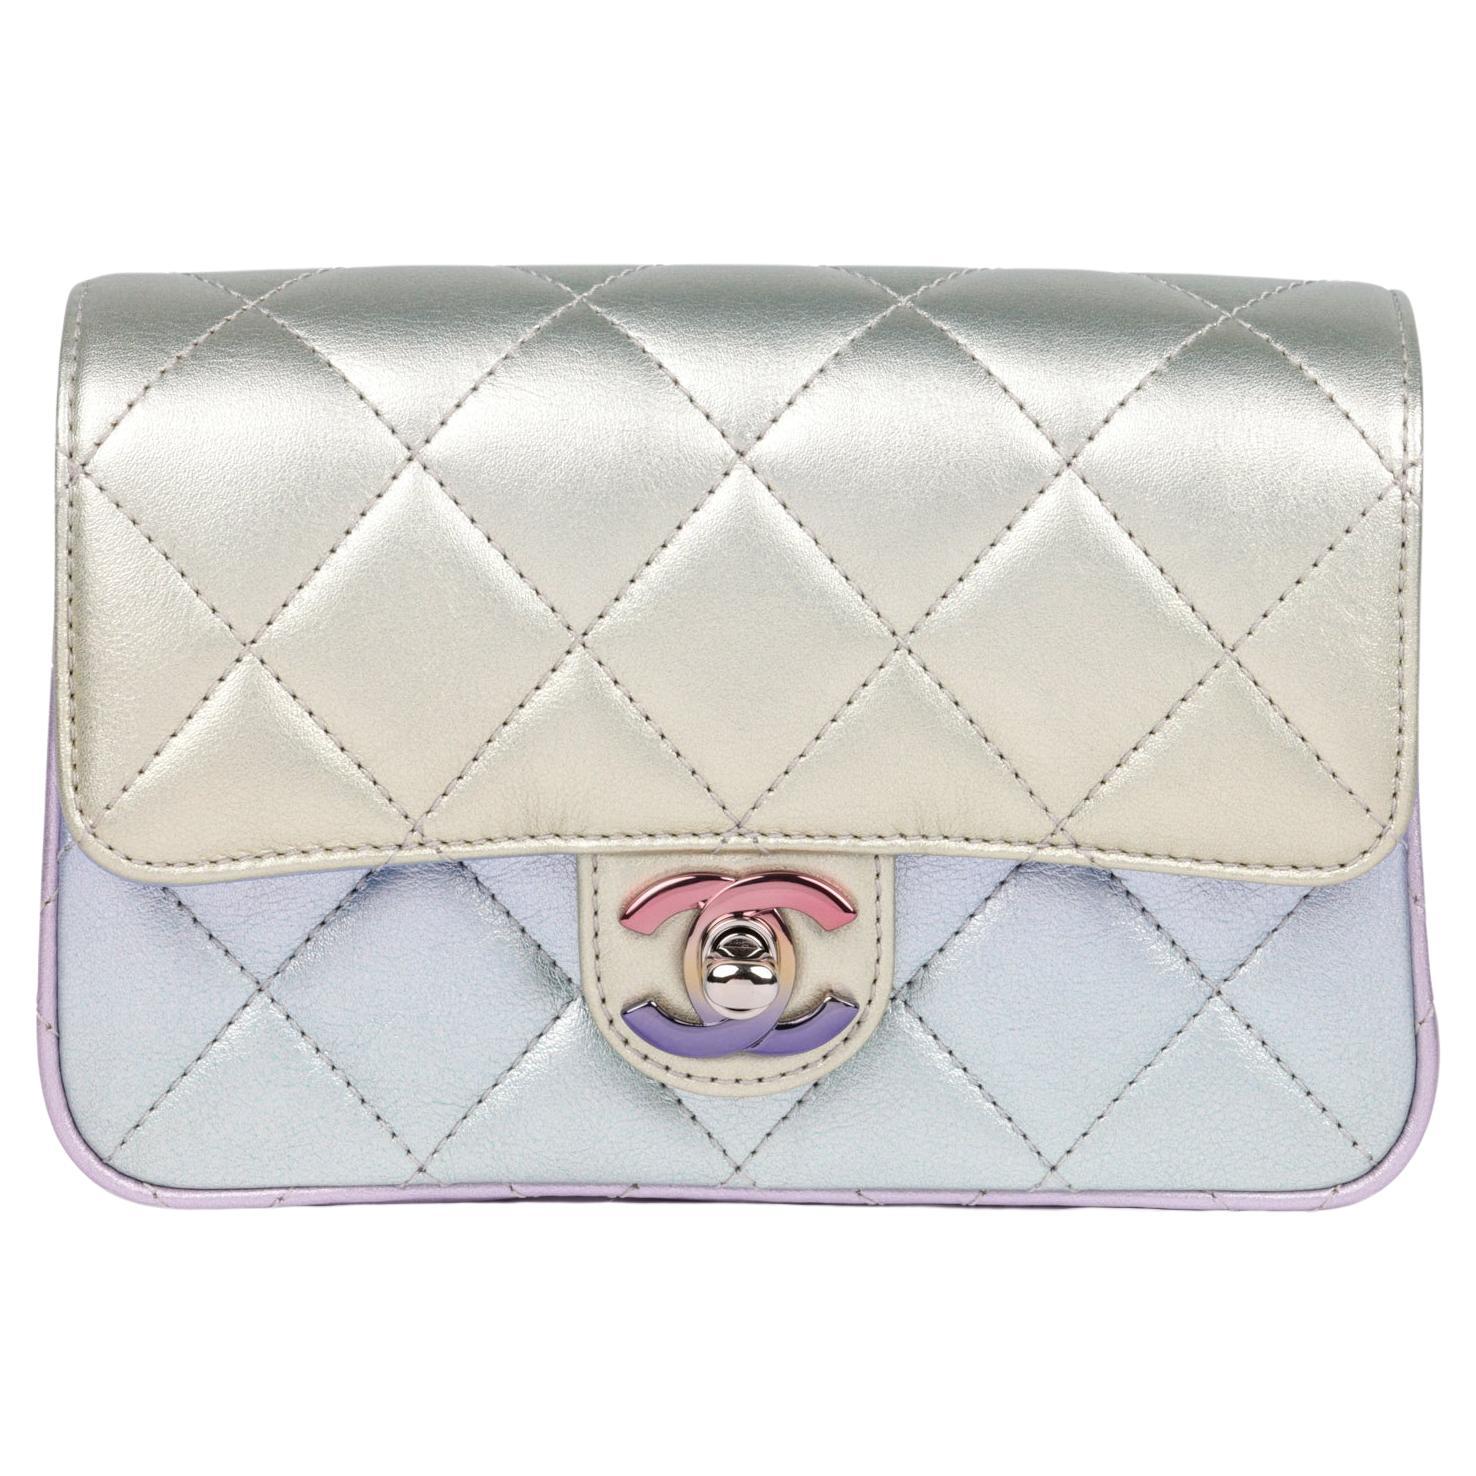 CHANEL Silver, Yellow & Purple Gradient Quilted Lambskin Classic Wristlet Clutch